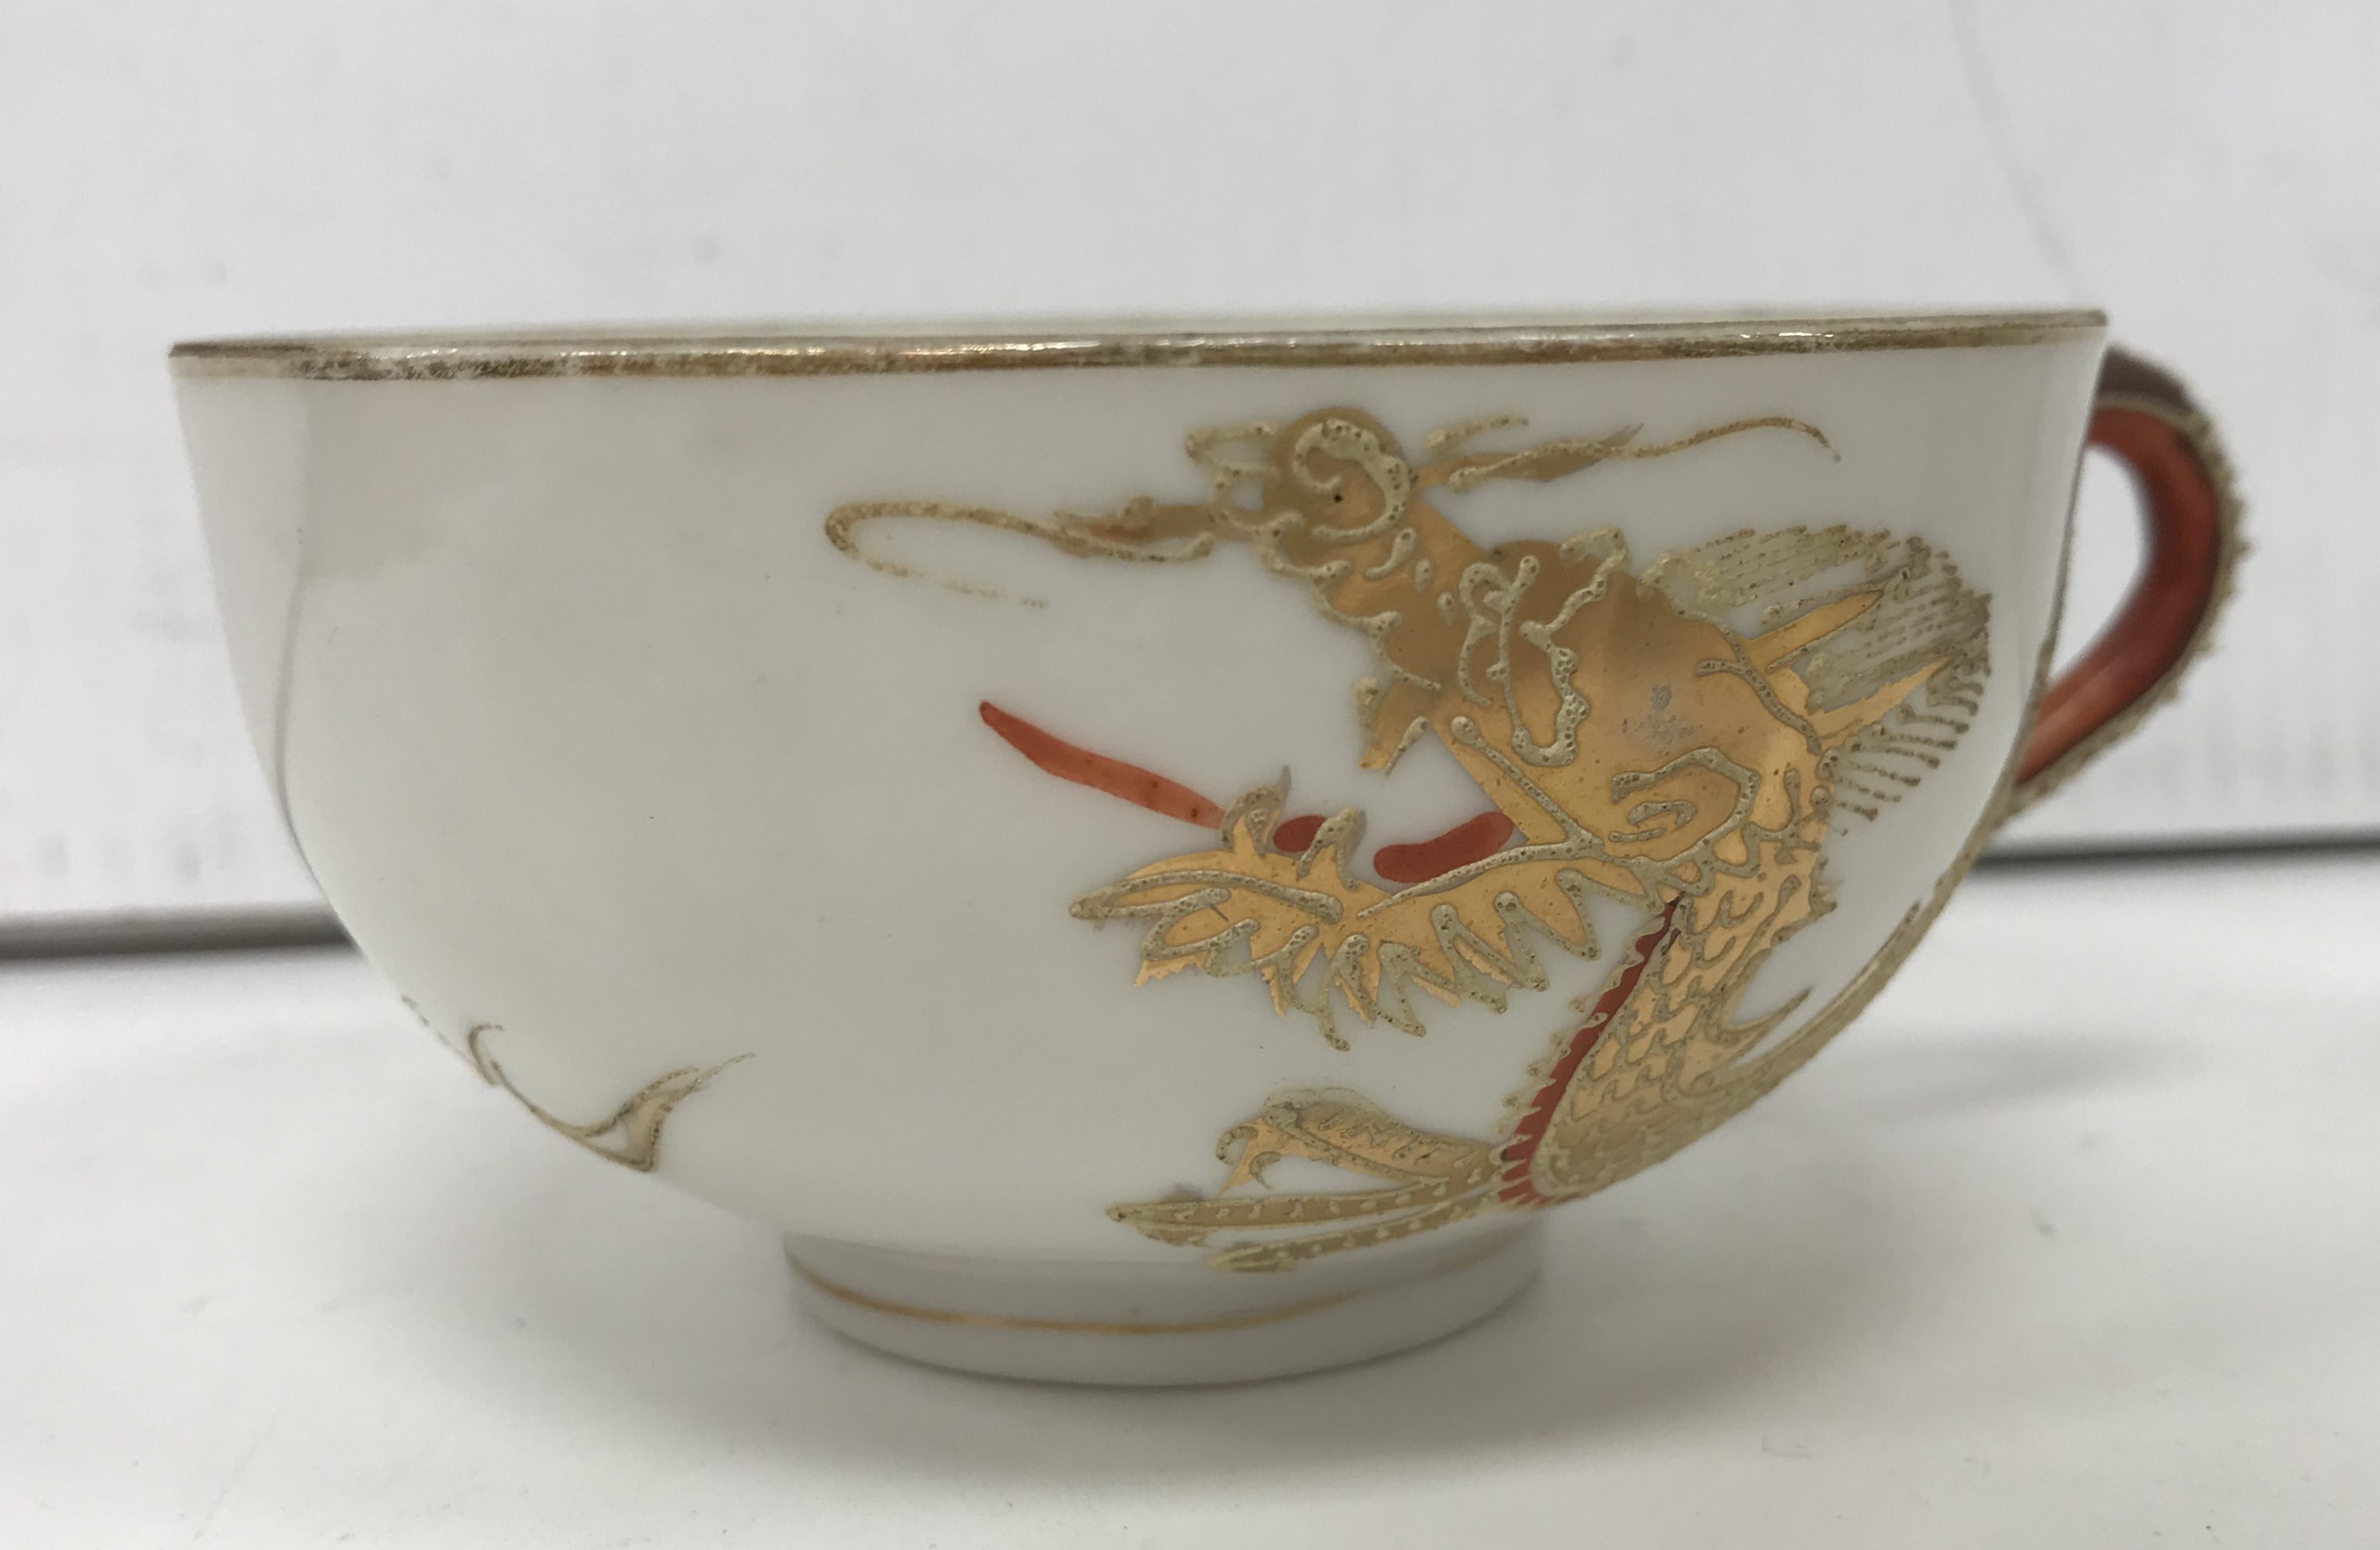 A collection of various Japanese and Chinese pottery and porcelain including a Japanese dragon - Image 9 of 10